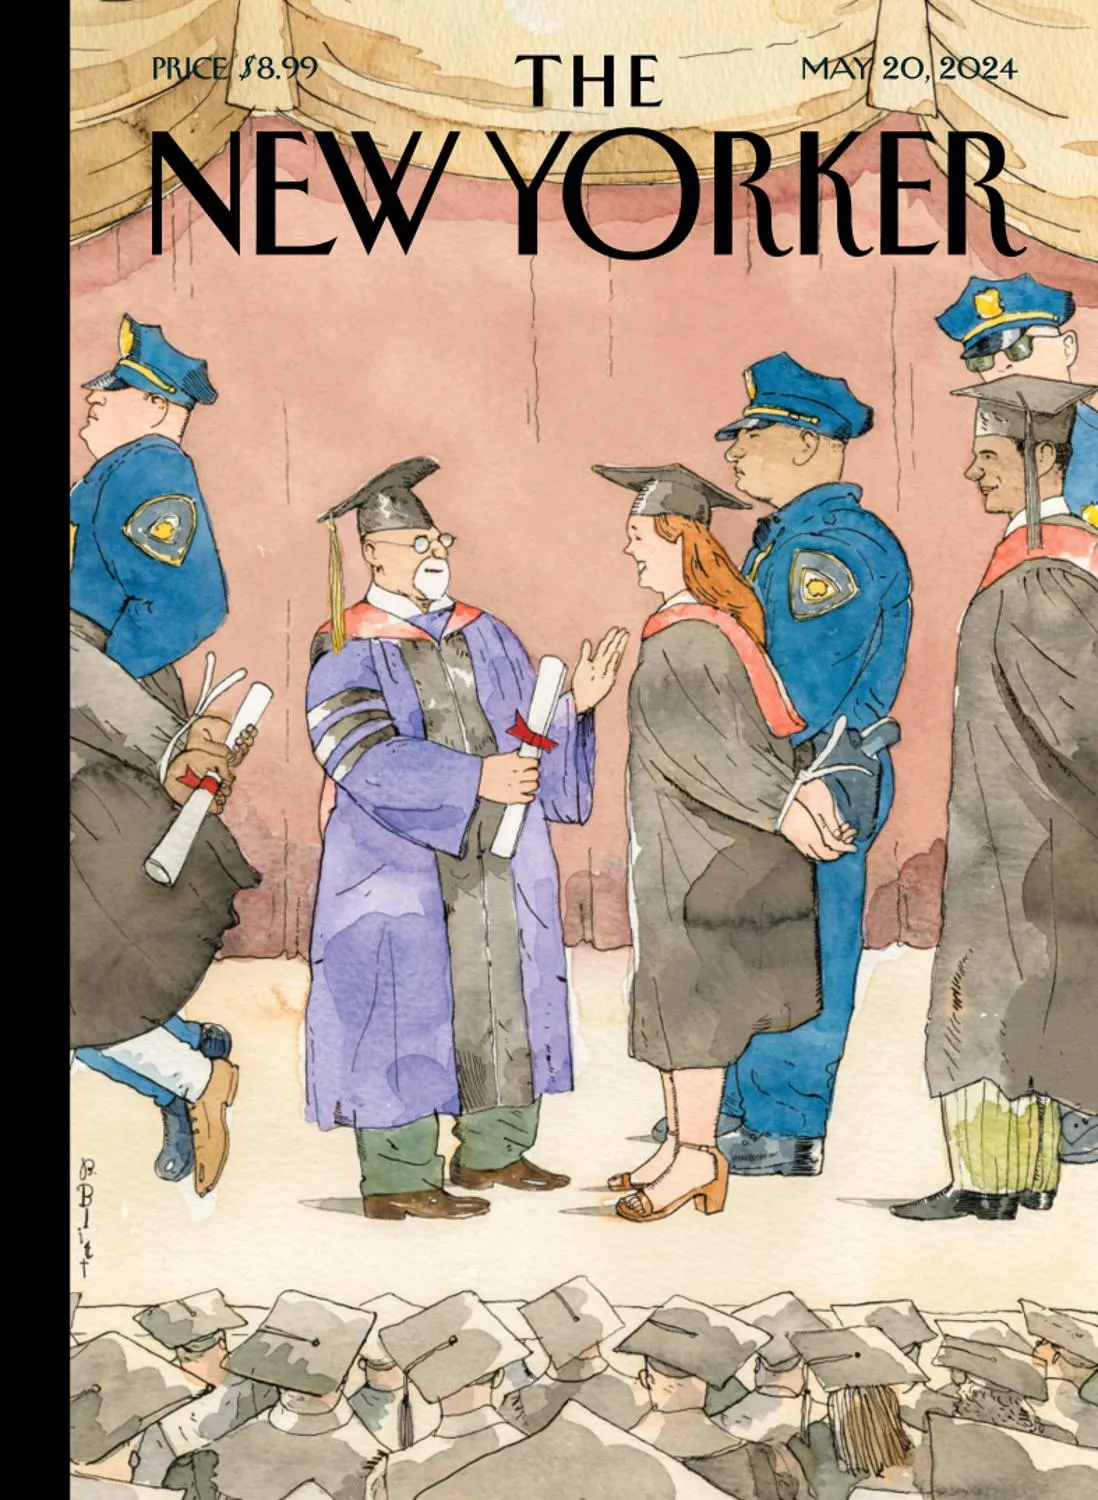 The New Yorker – May 20, 2024